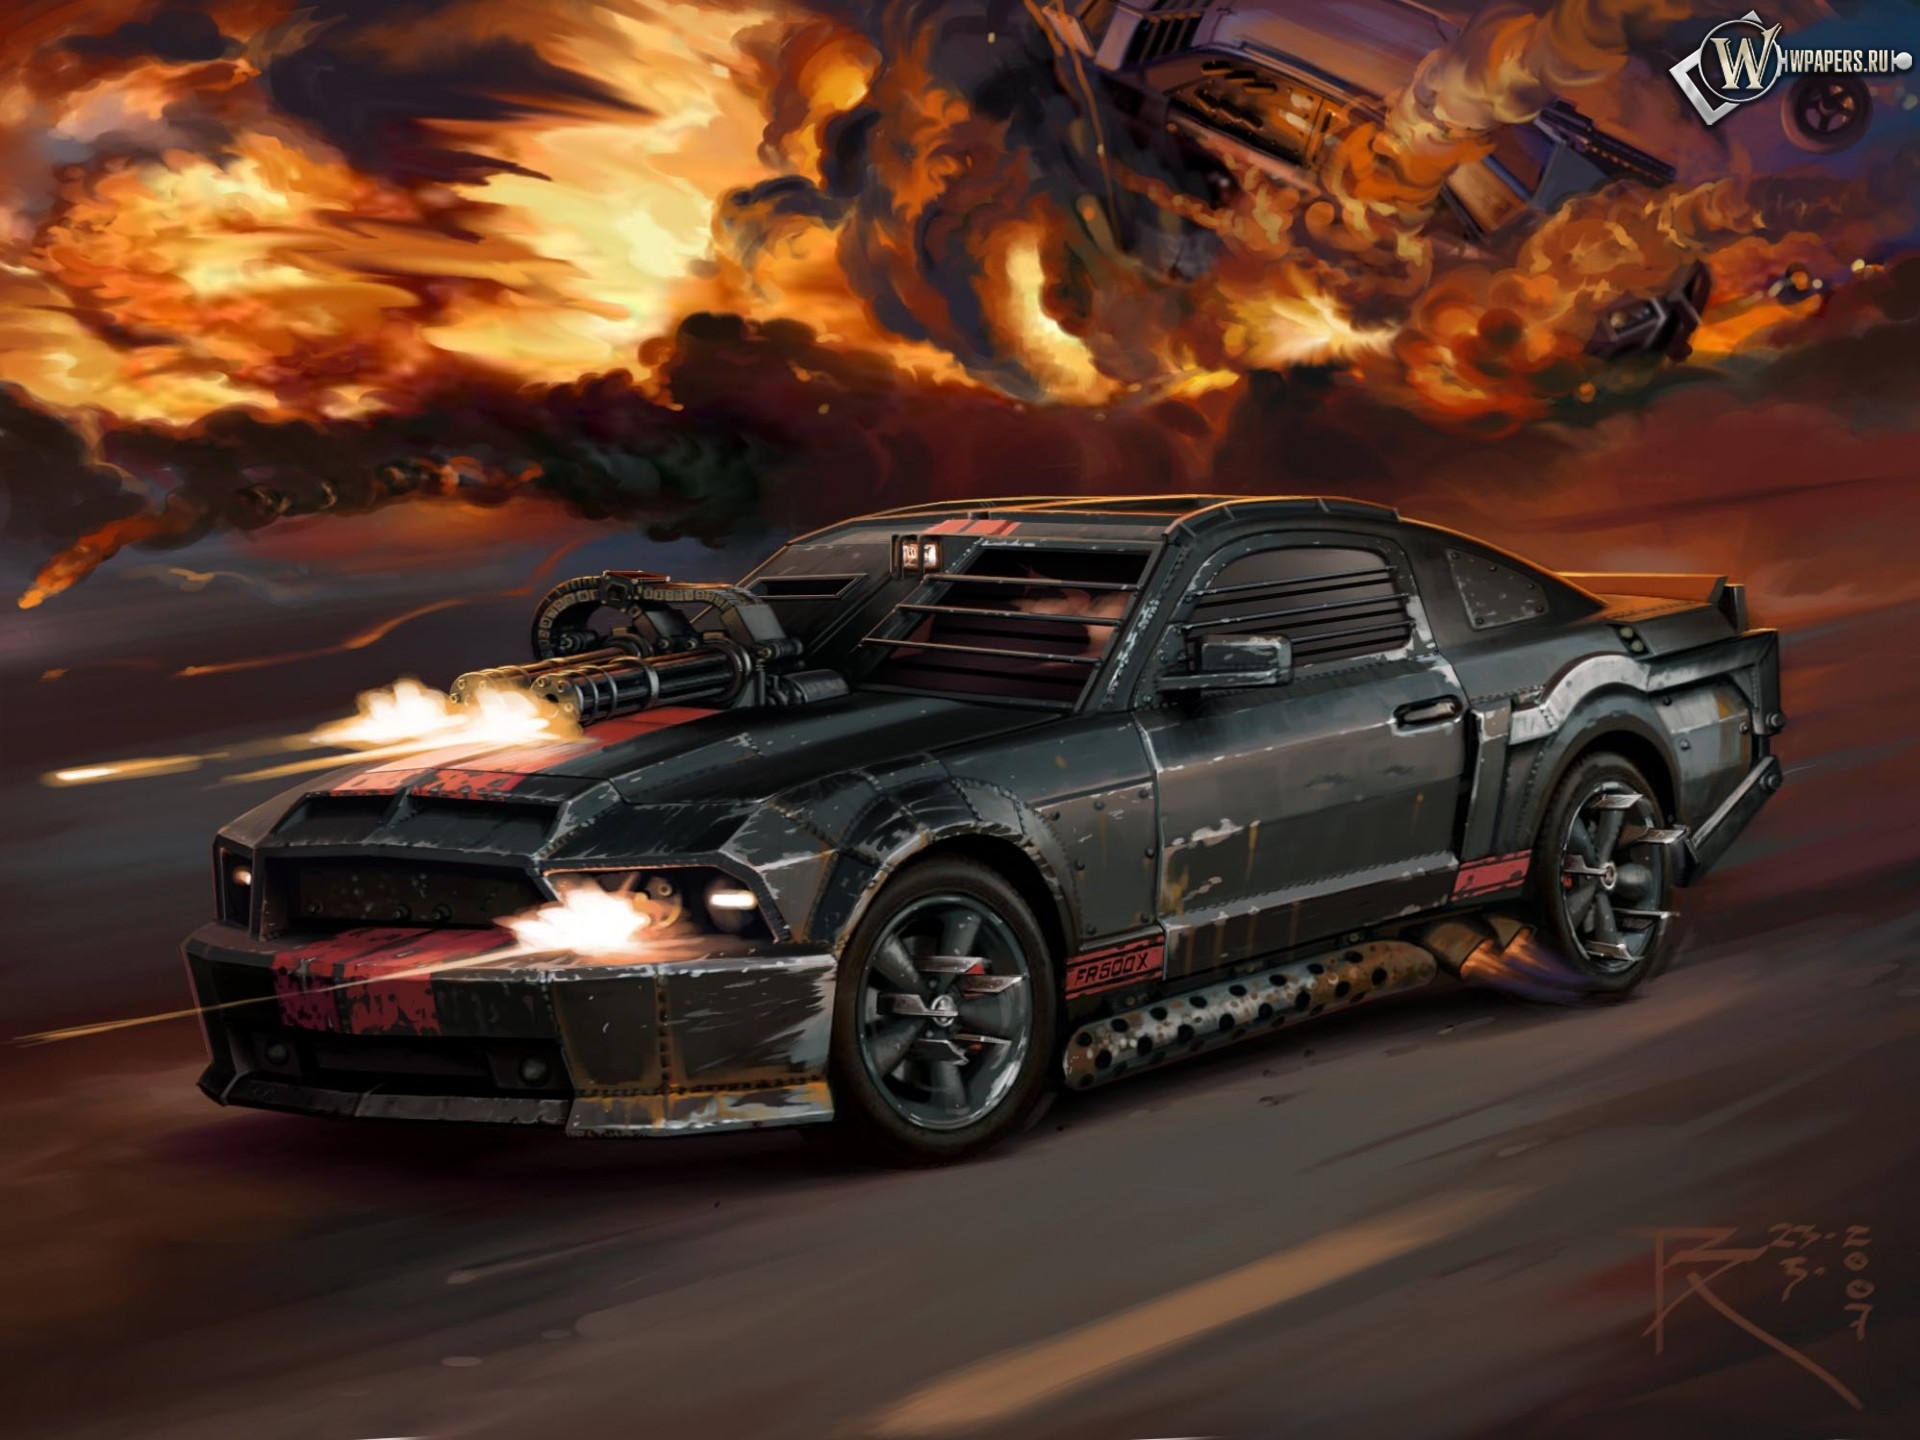 Car ford mustang death race 1920x1440